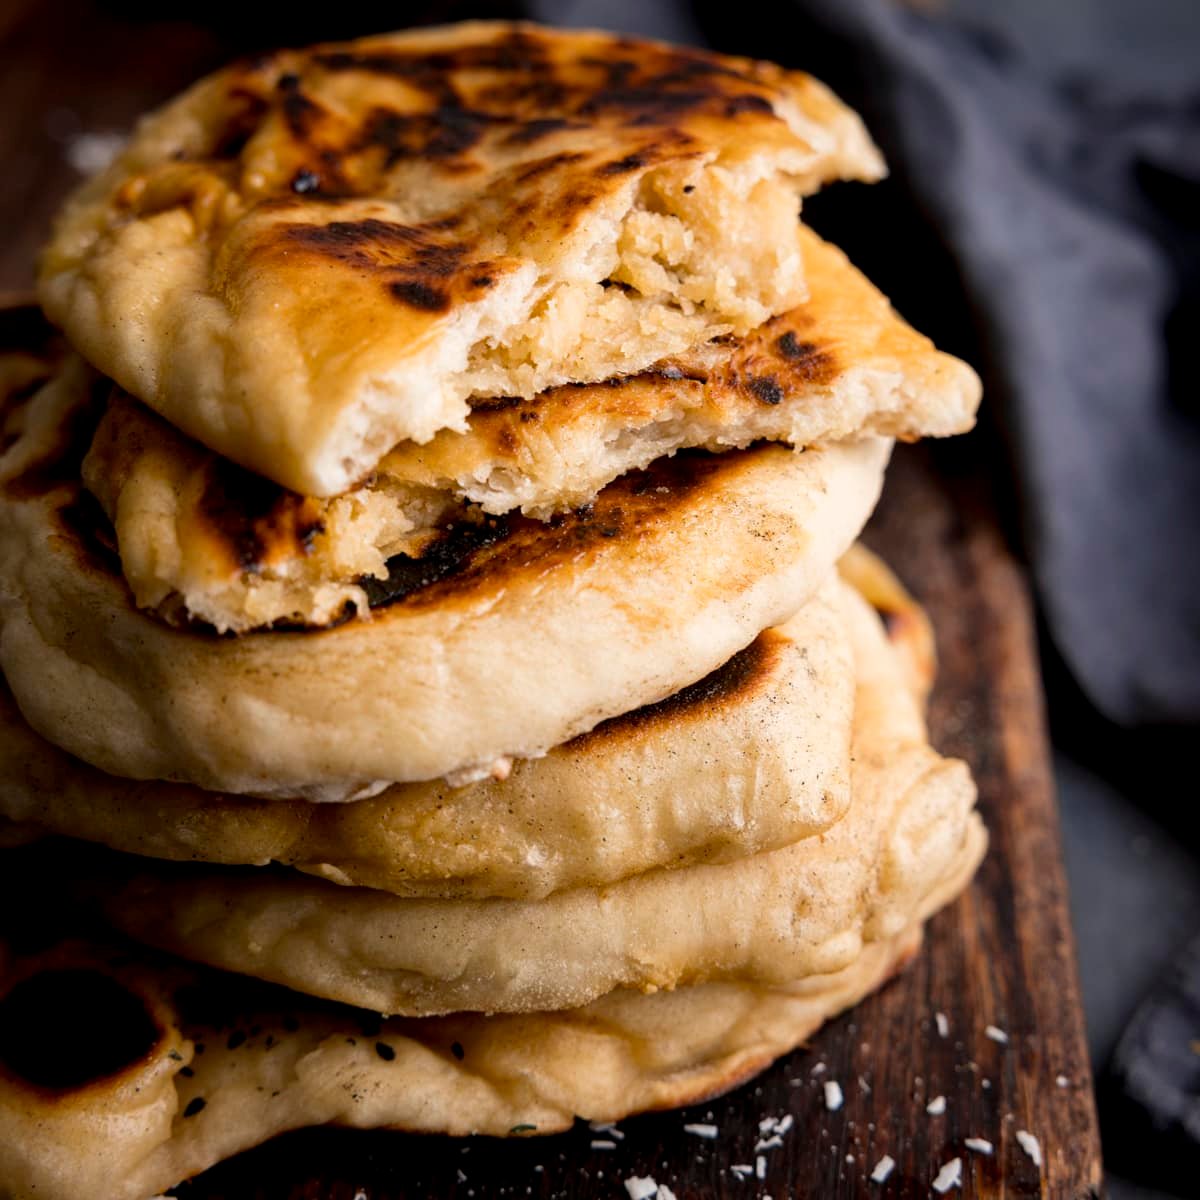 Close up of a stack of peshwari naan breads on a dark wooden board against a blue background. There is a blue napkin in shot. The top naan has been broken into two to show the filling.